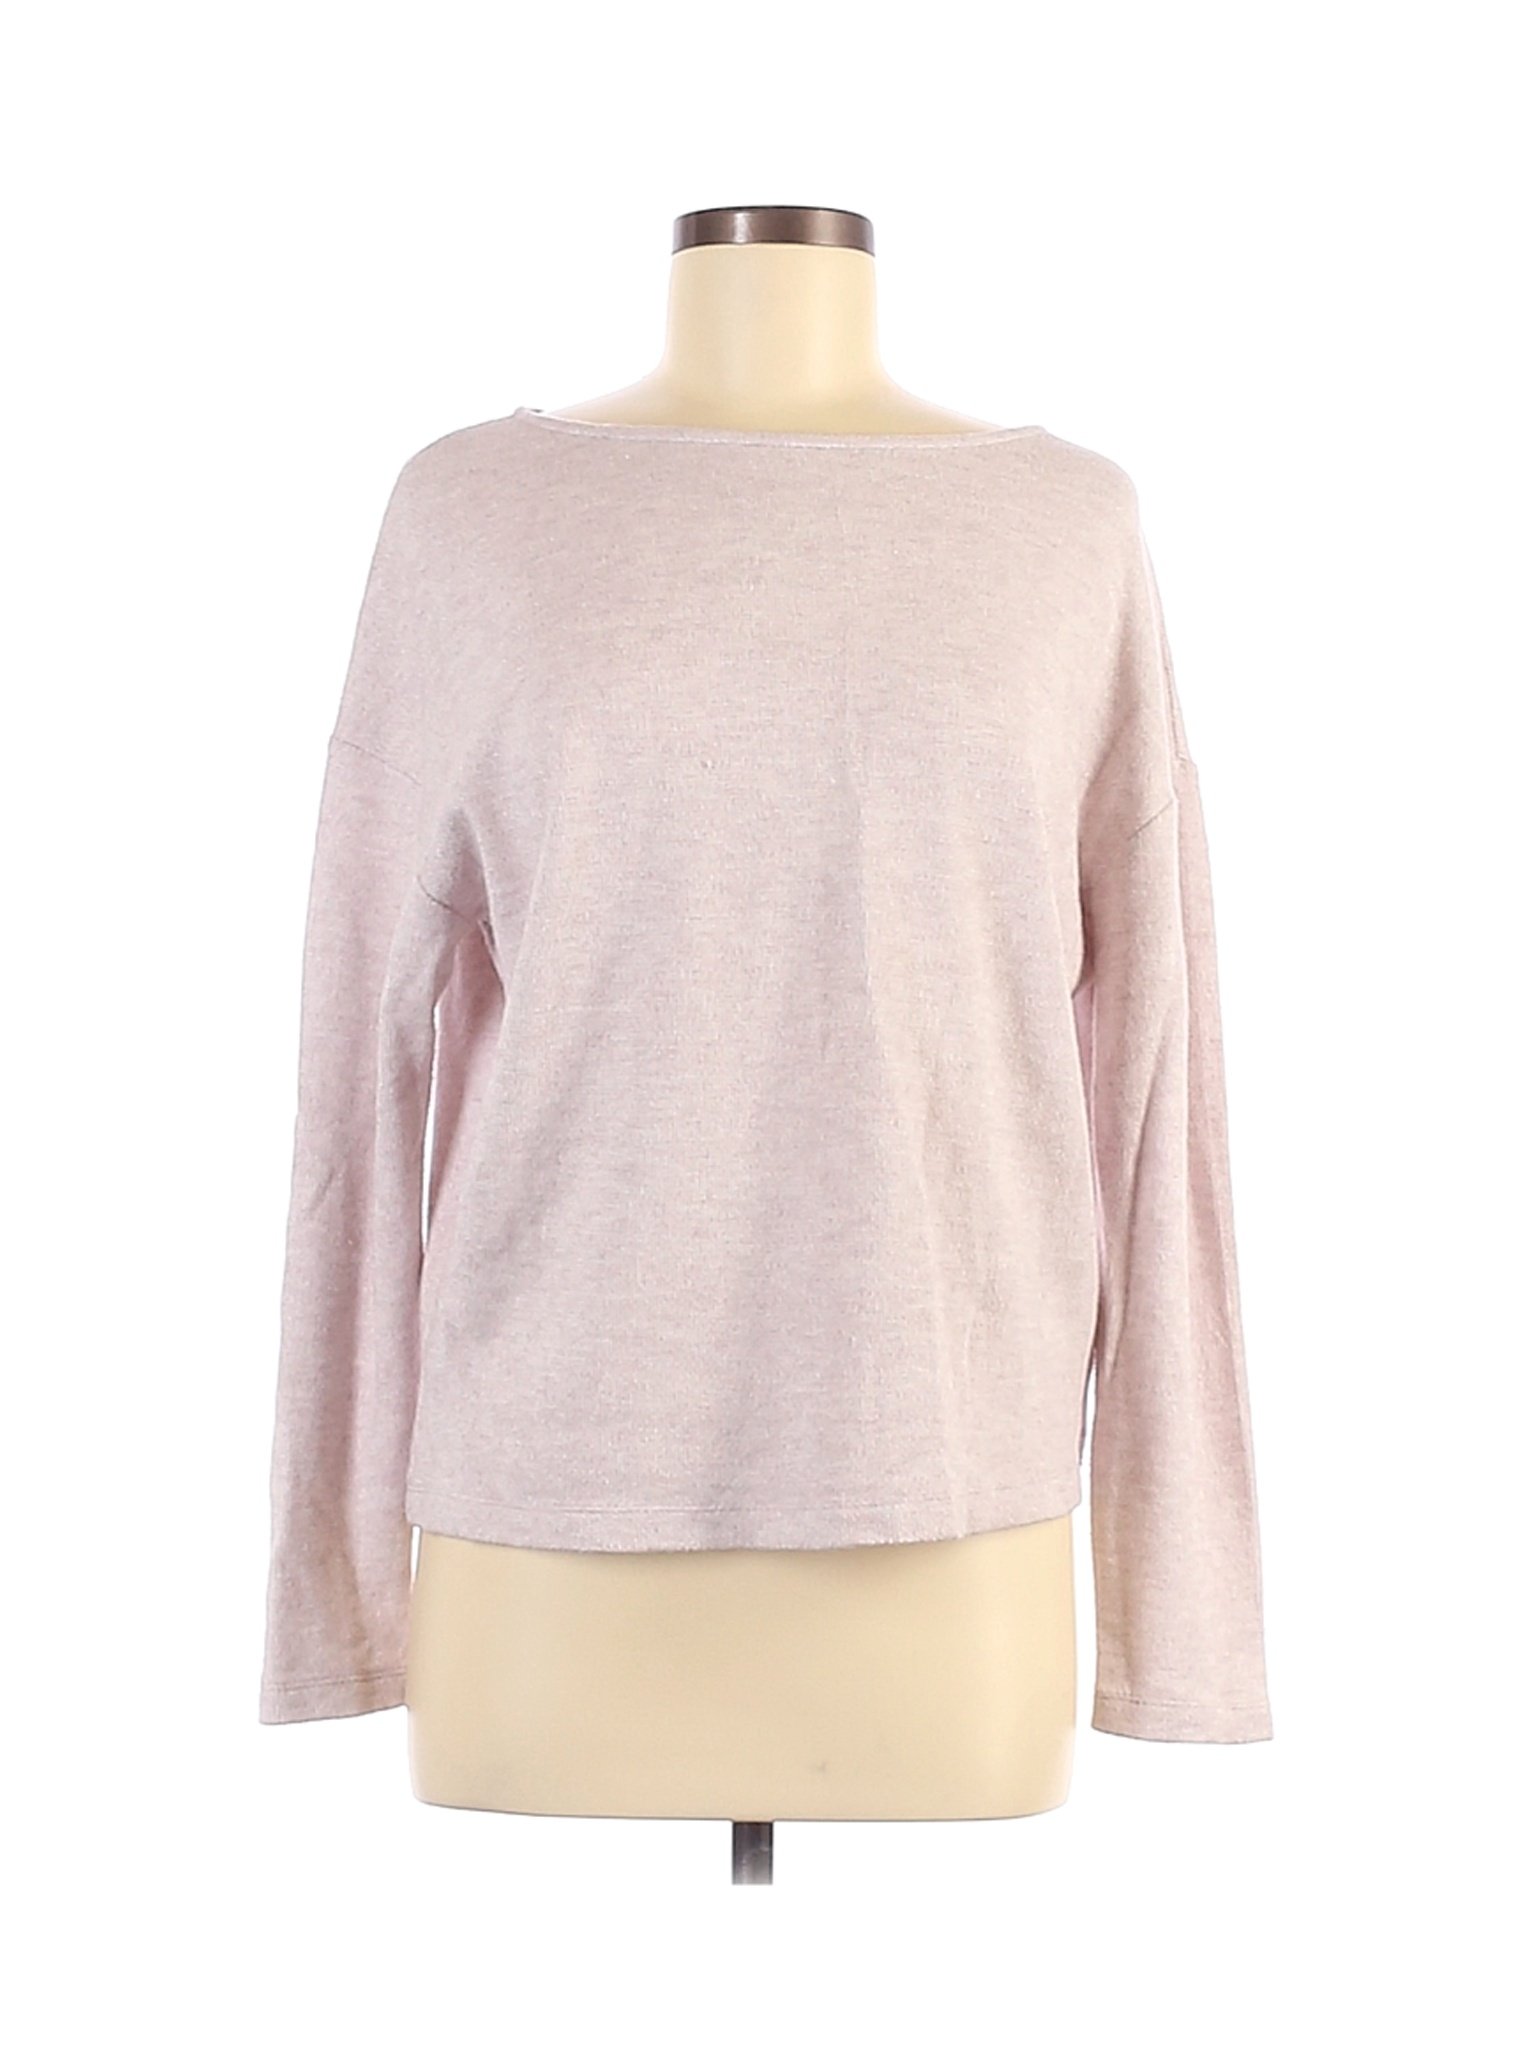 A New Day Women Pink Pullover Sweater M | eBay